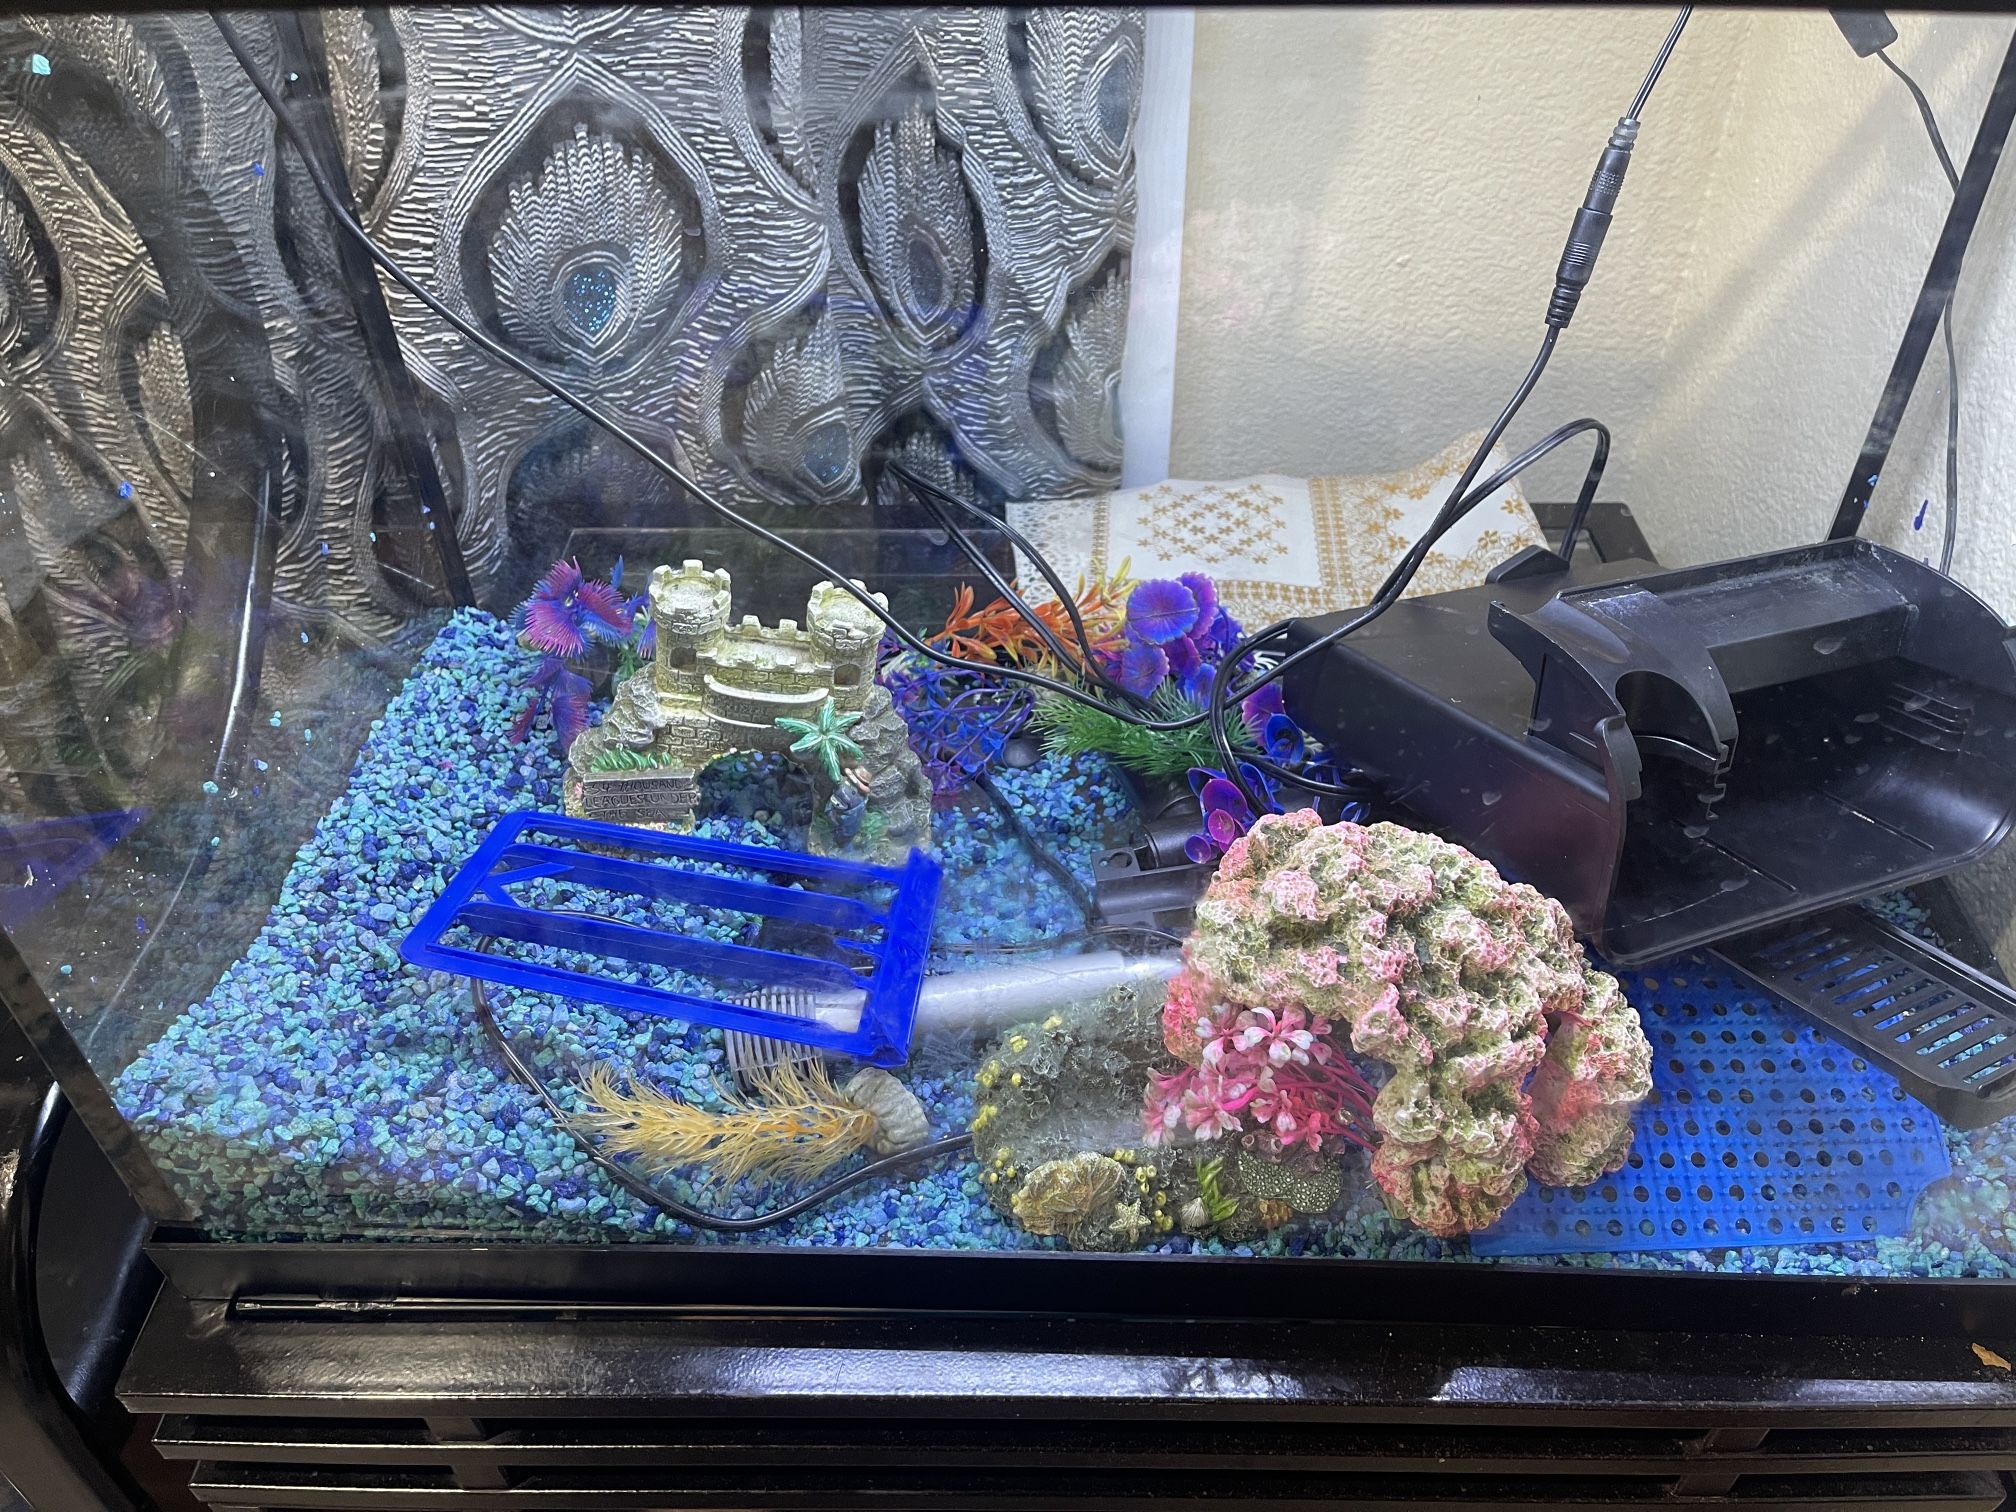 Set Of Fish Aquarium, 20 Gallon Fish Tank, With Table And All Necessary Items